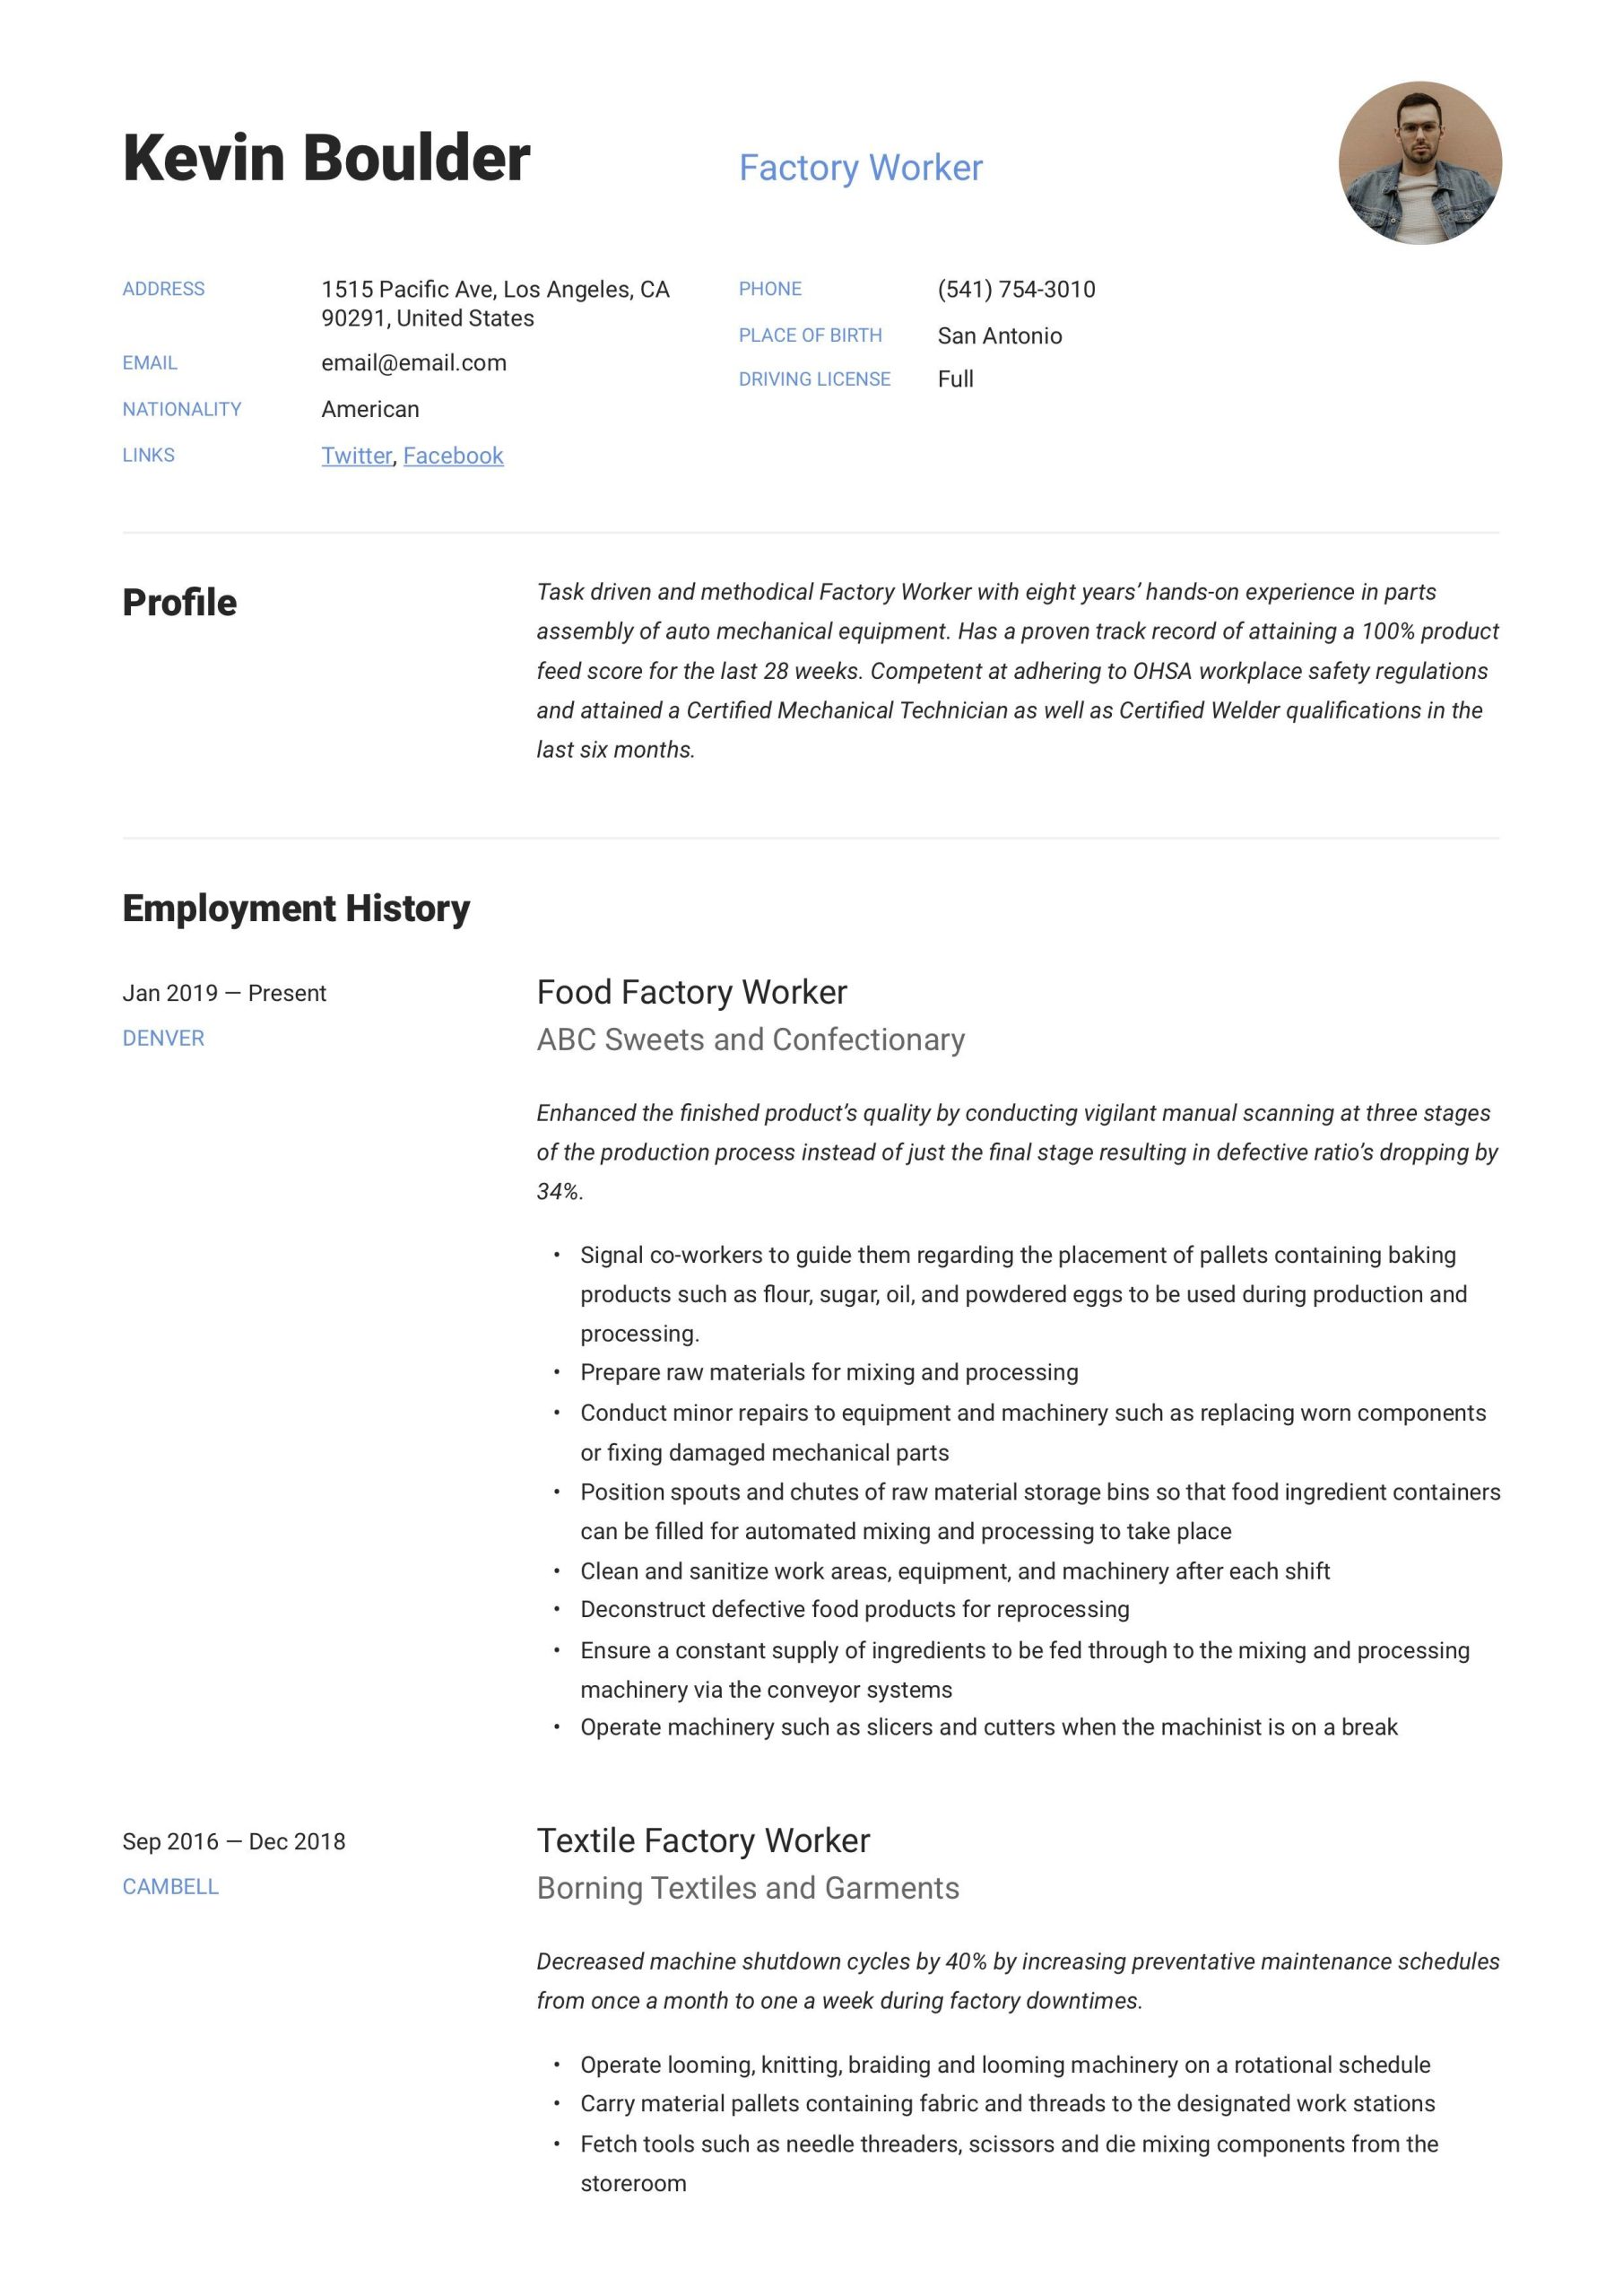 Resume Samples for Construction Job Descriptions Factory Worker Resume Example Resume Examples, Guided Writing …